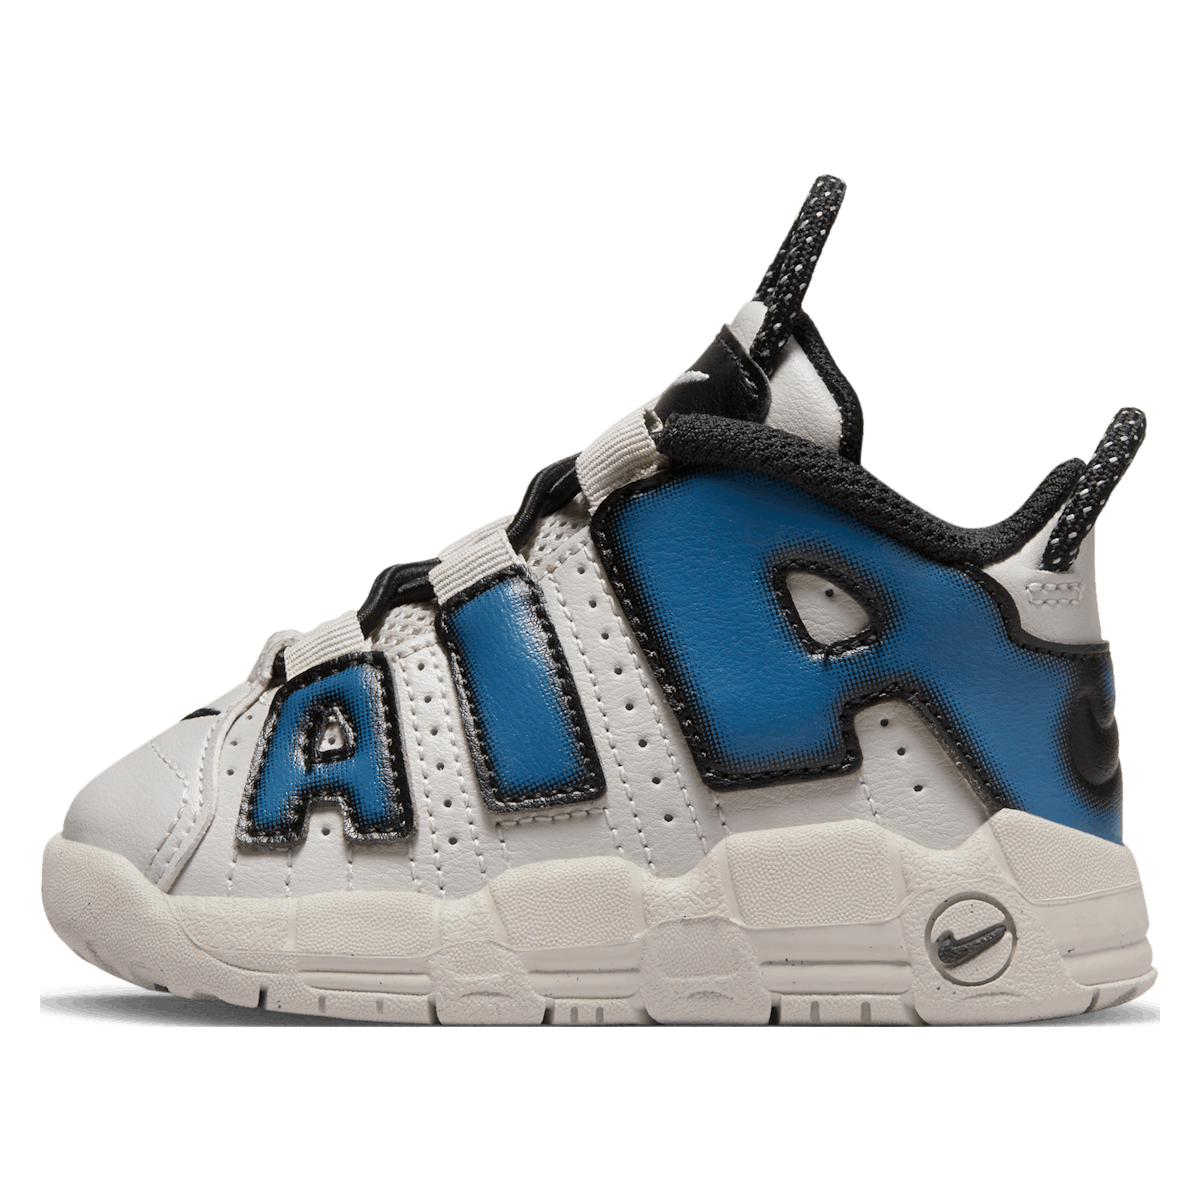 Nike Air More Uptempo TD "Industrial Blue"